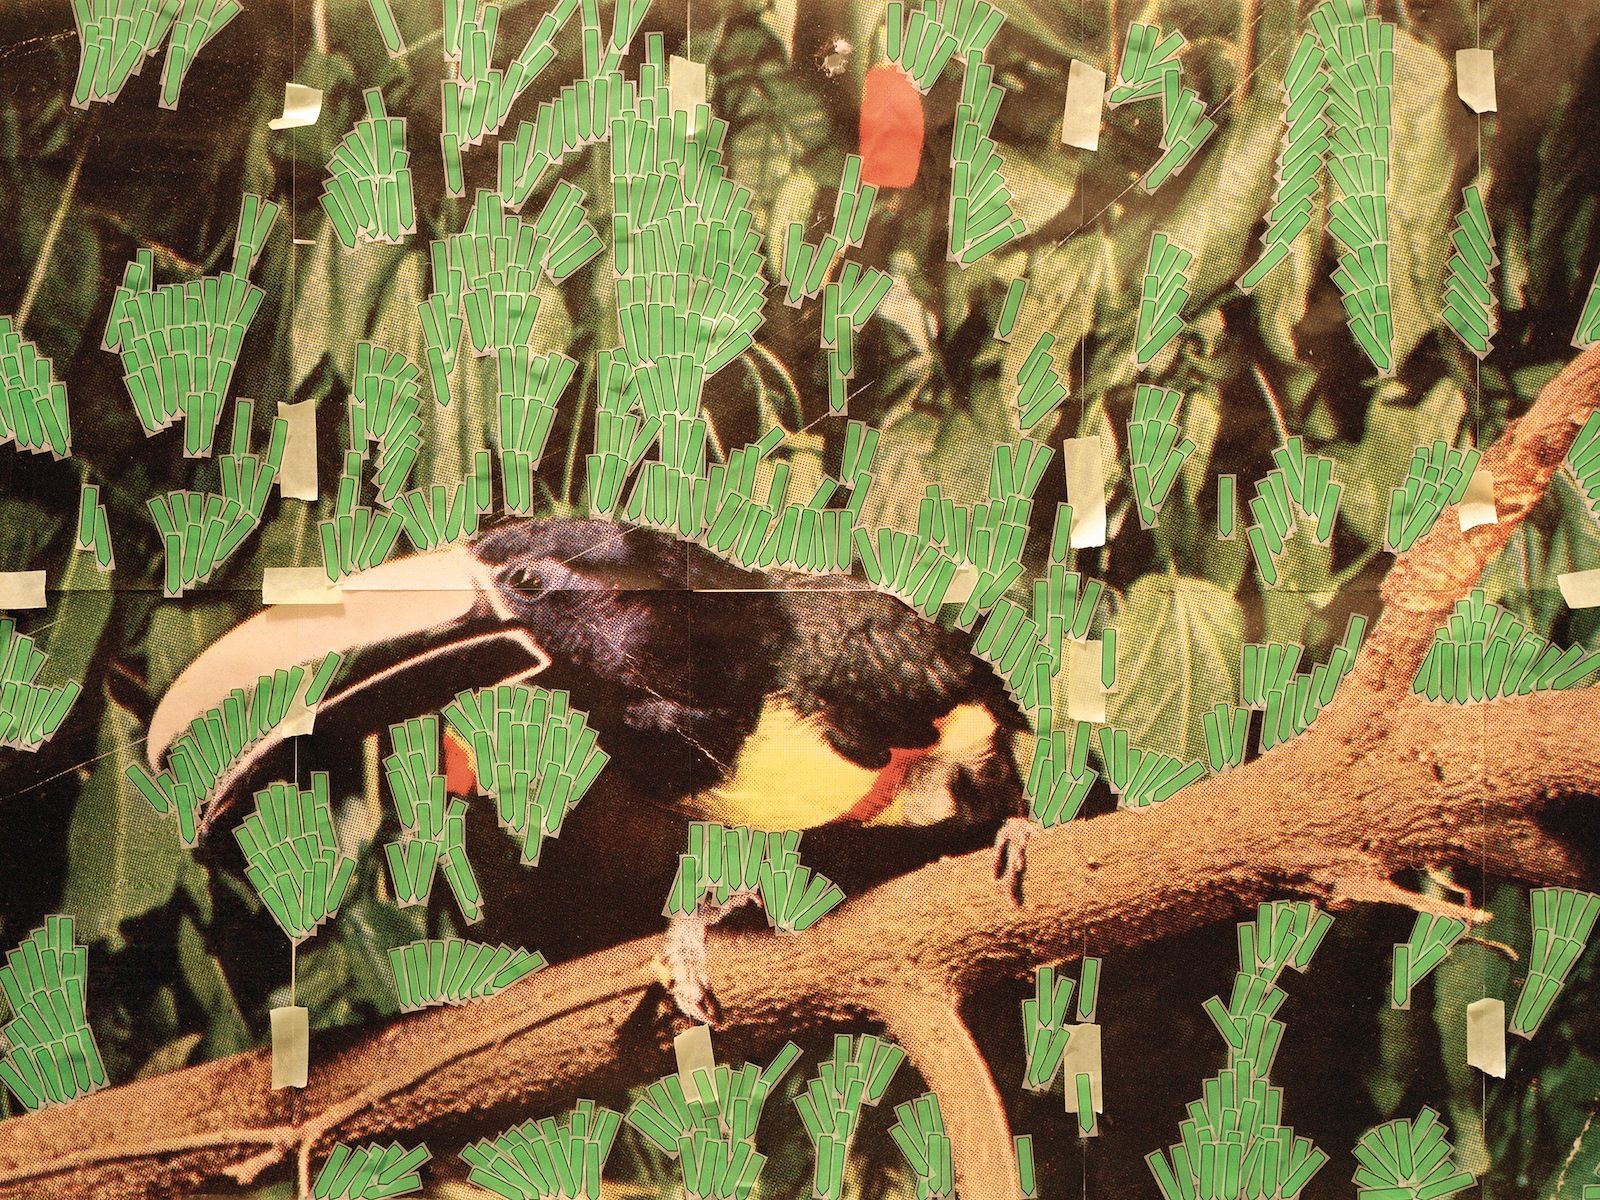 Sara Cwynar, Toucan In Nature (Post it Notes), 2013, chromogenic print on matte paper mounted to plexiglas, 30 × 40 in. (76.20 × 101.60 cm)